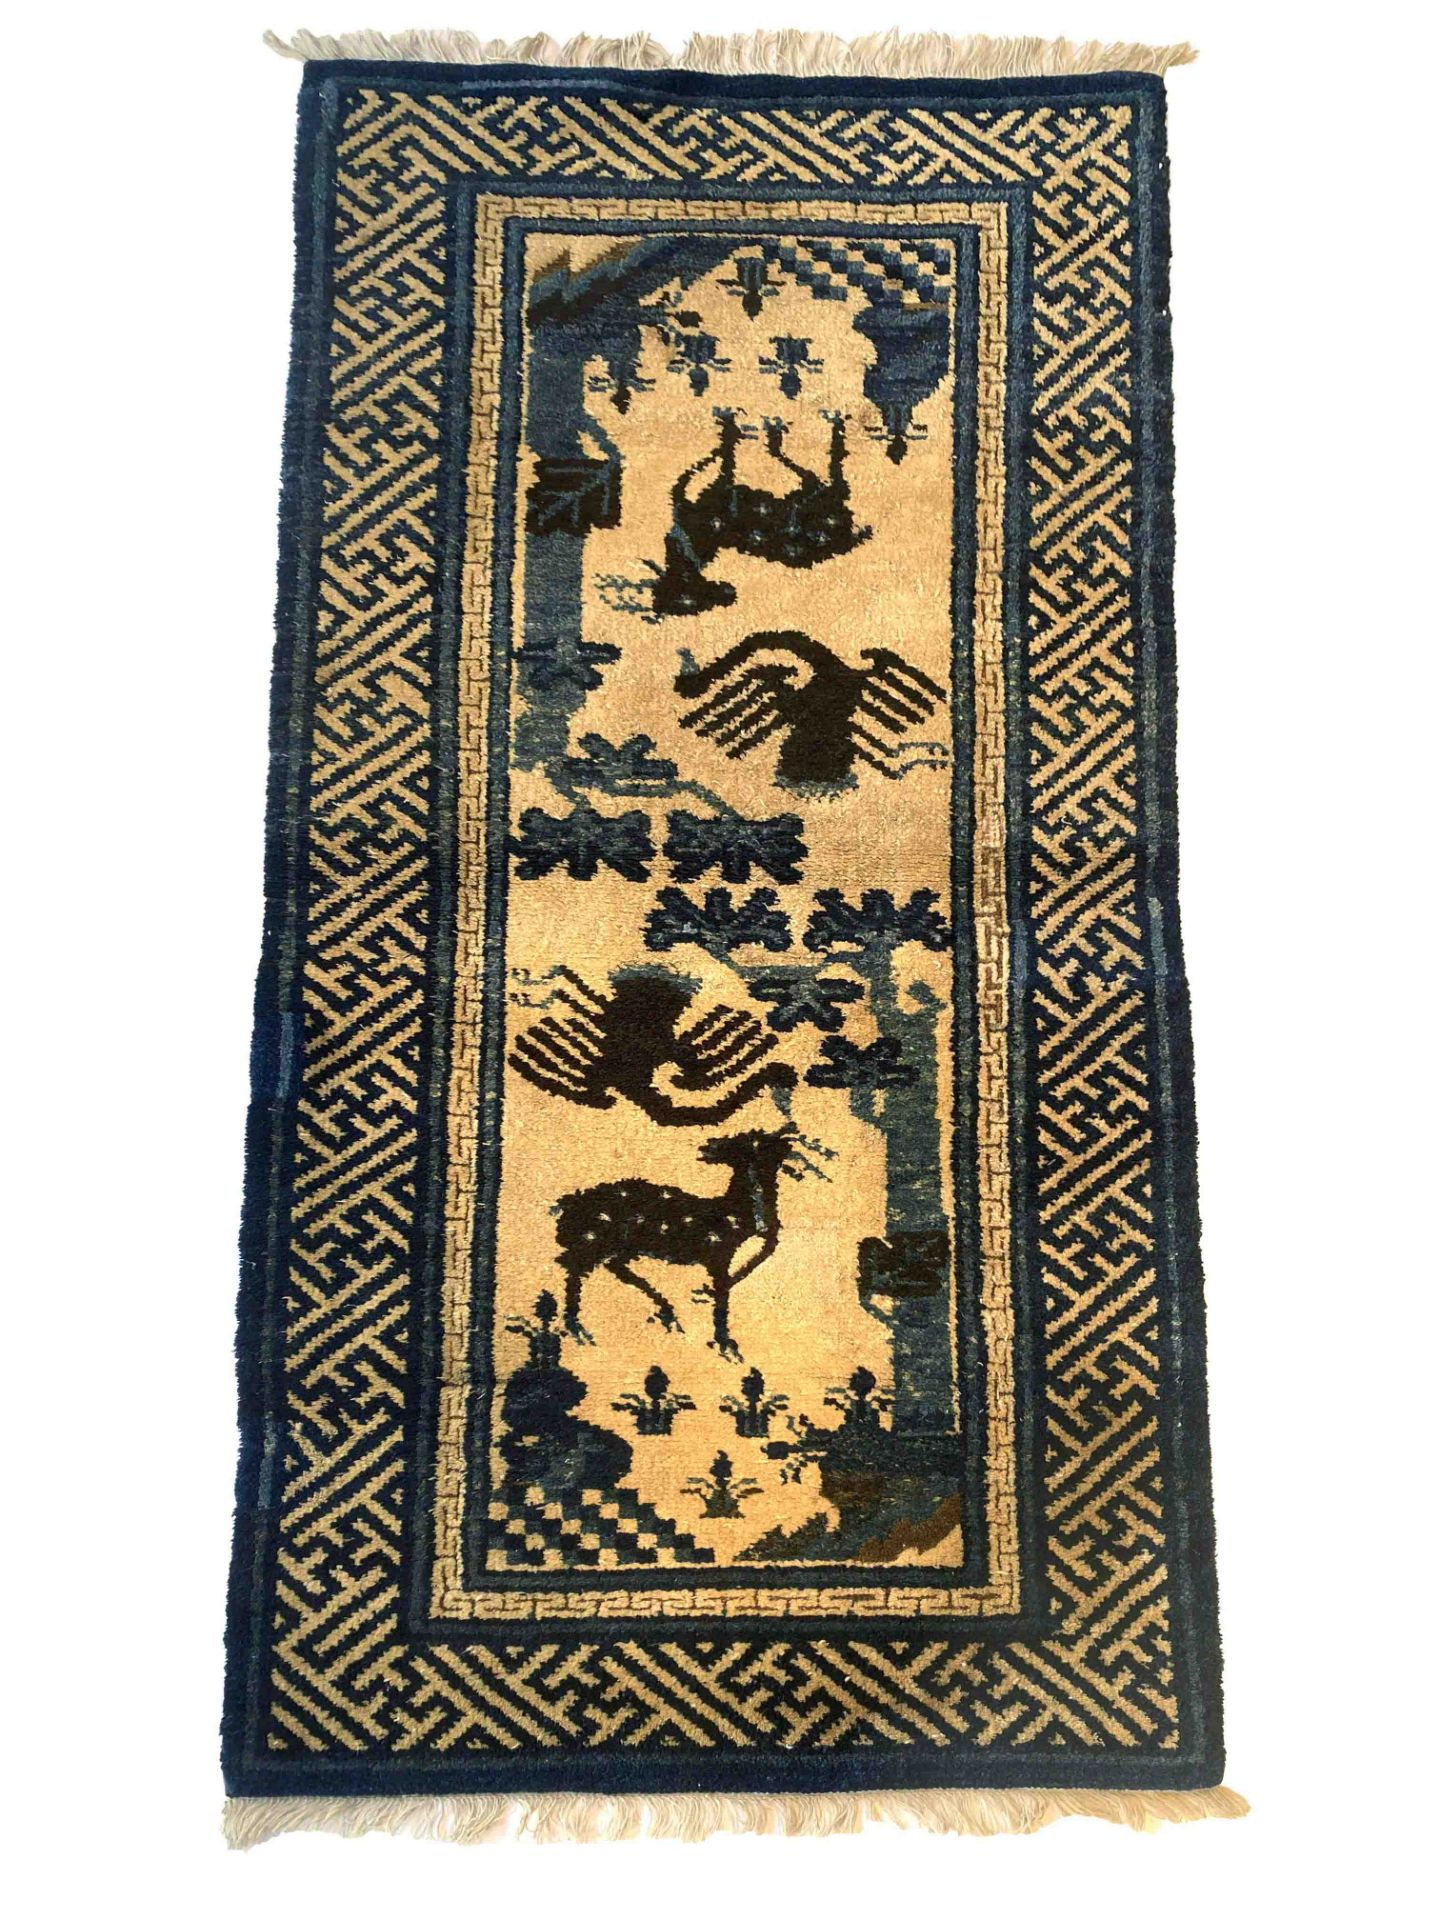 Carpet, China, good condition with minor wear, 133 x 62 cm - The carpet can only be viewed and